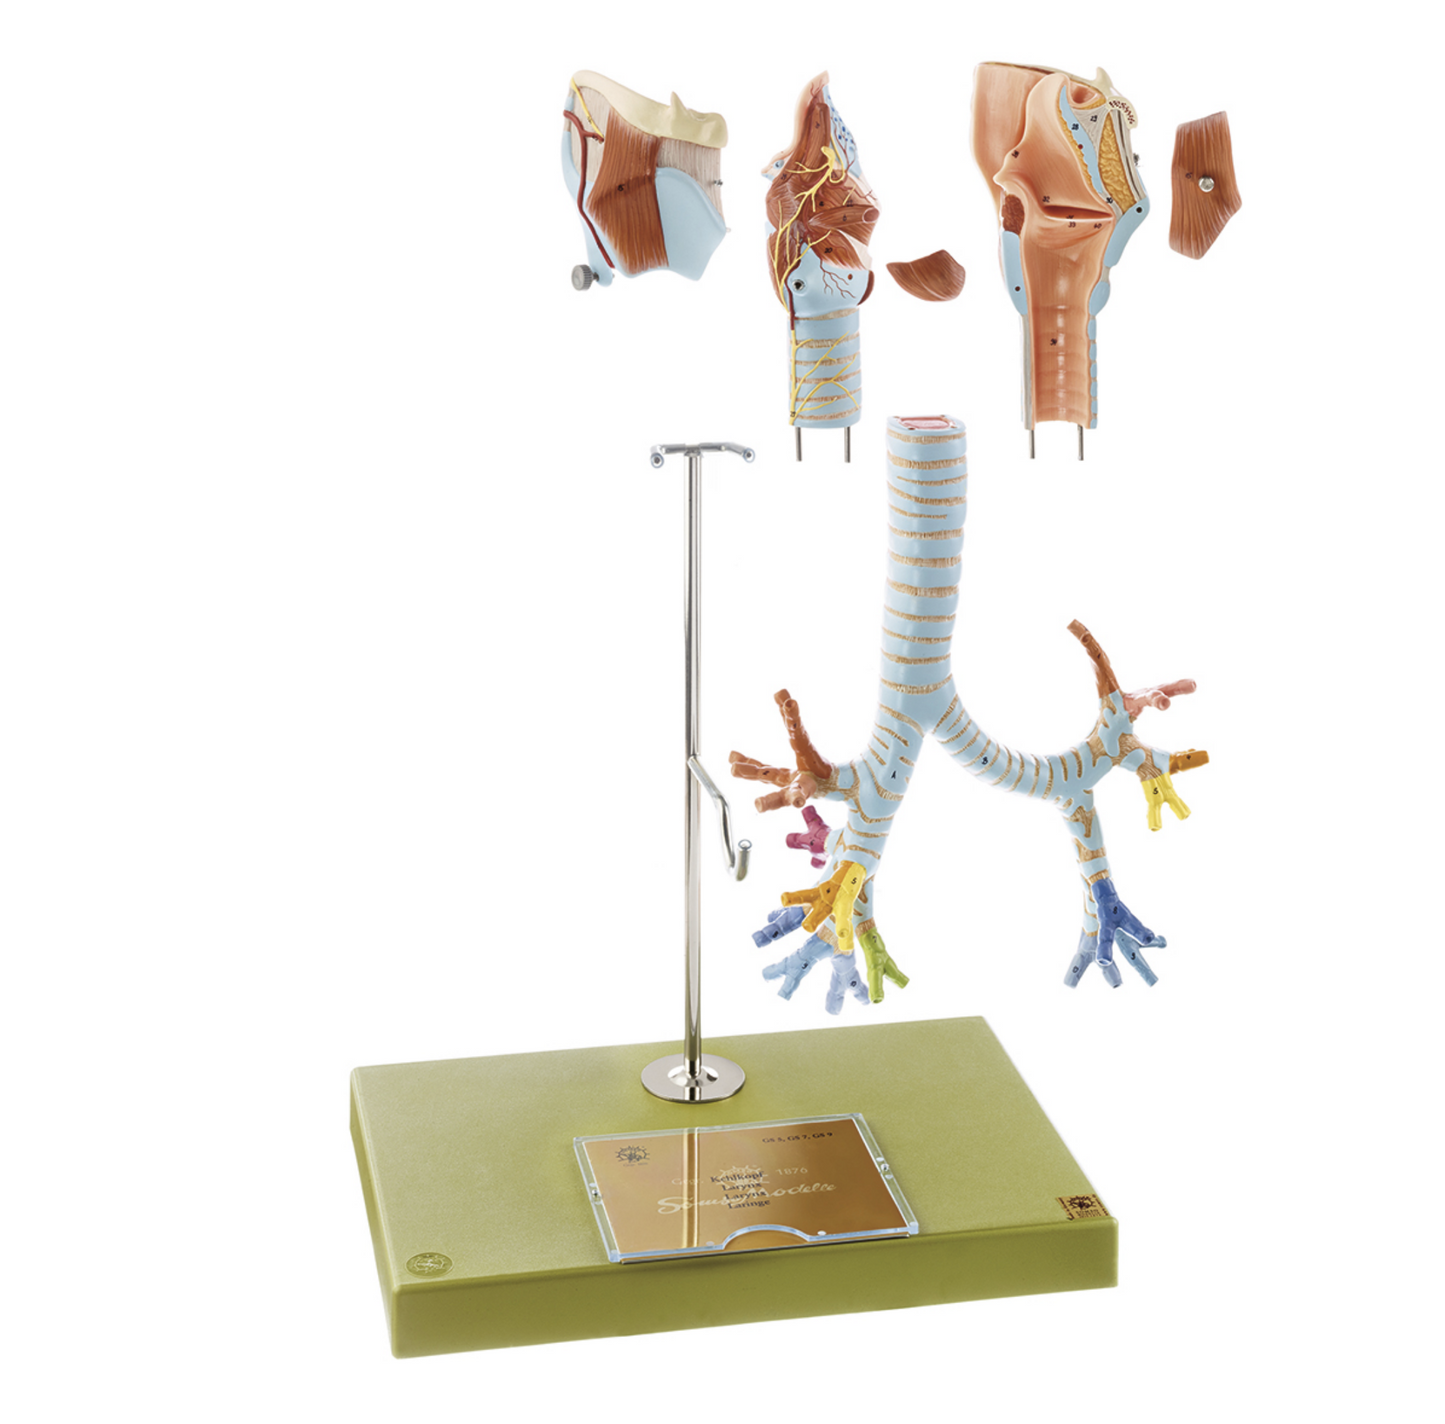 Anatomical model of the larynx with trachea and main bronchi